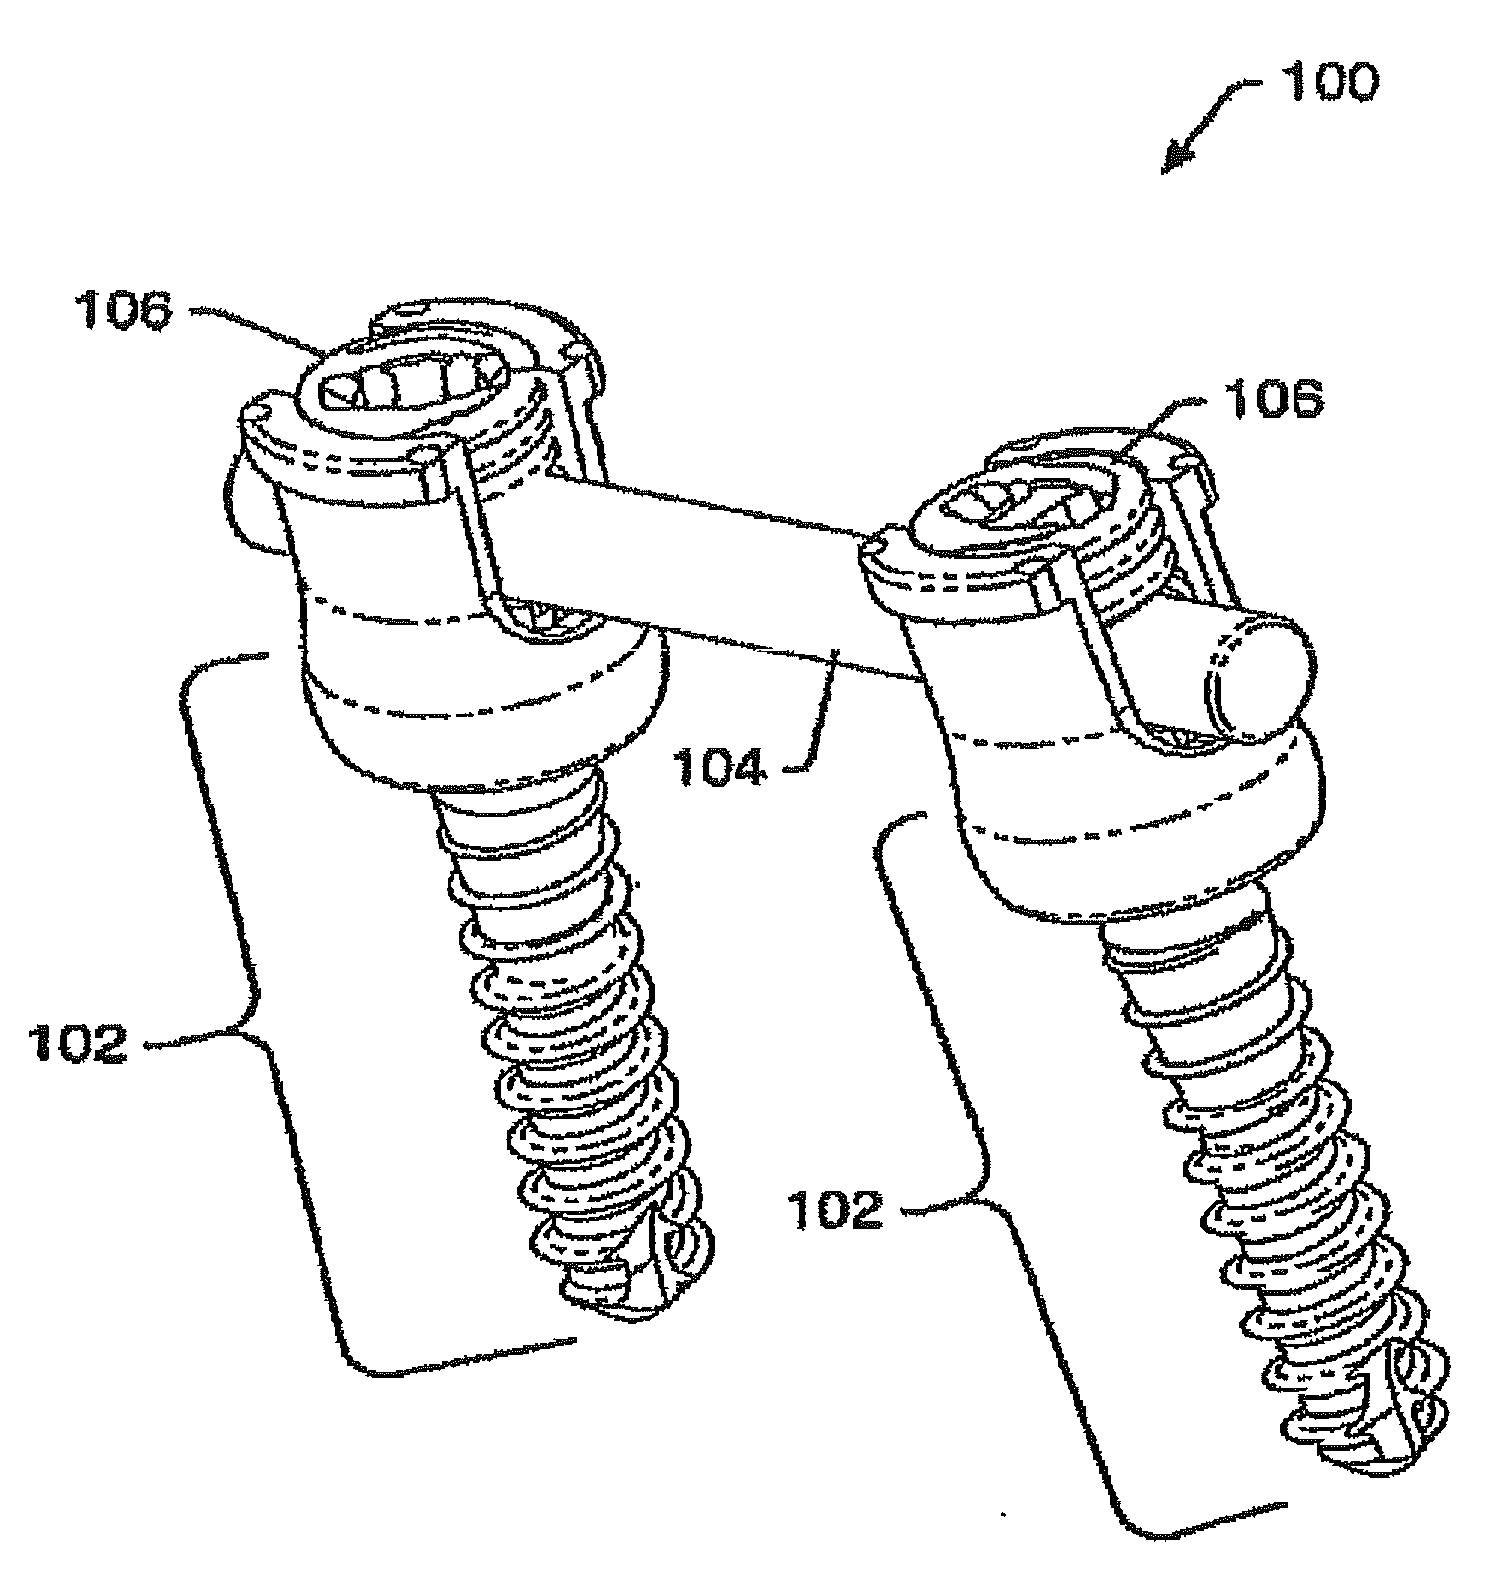 Mis crosslink apparatus and methods for spinal implant